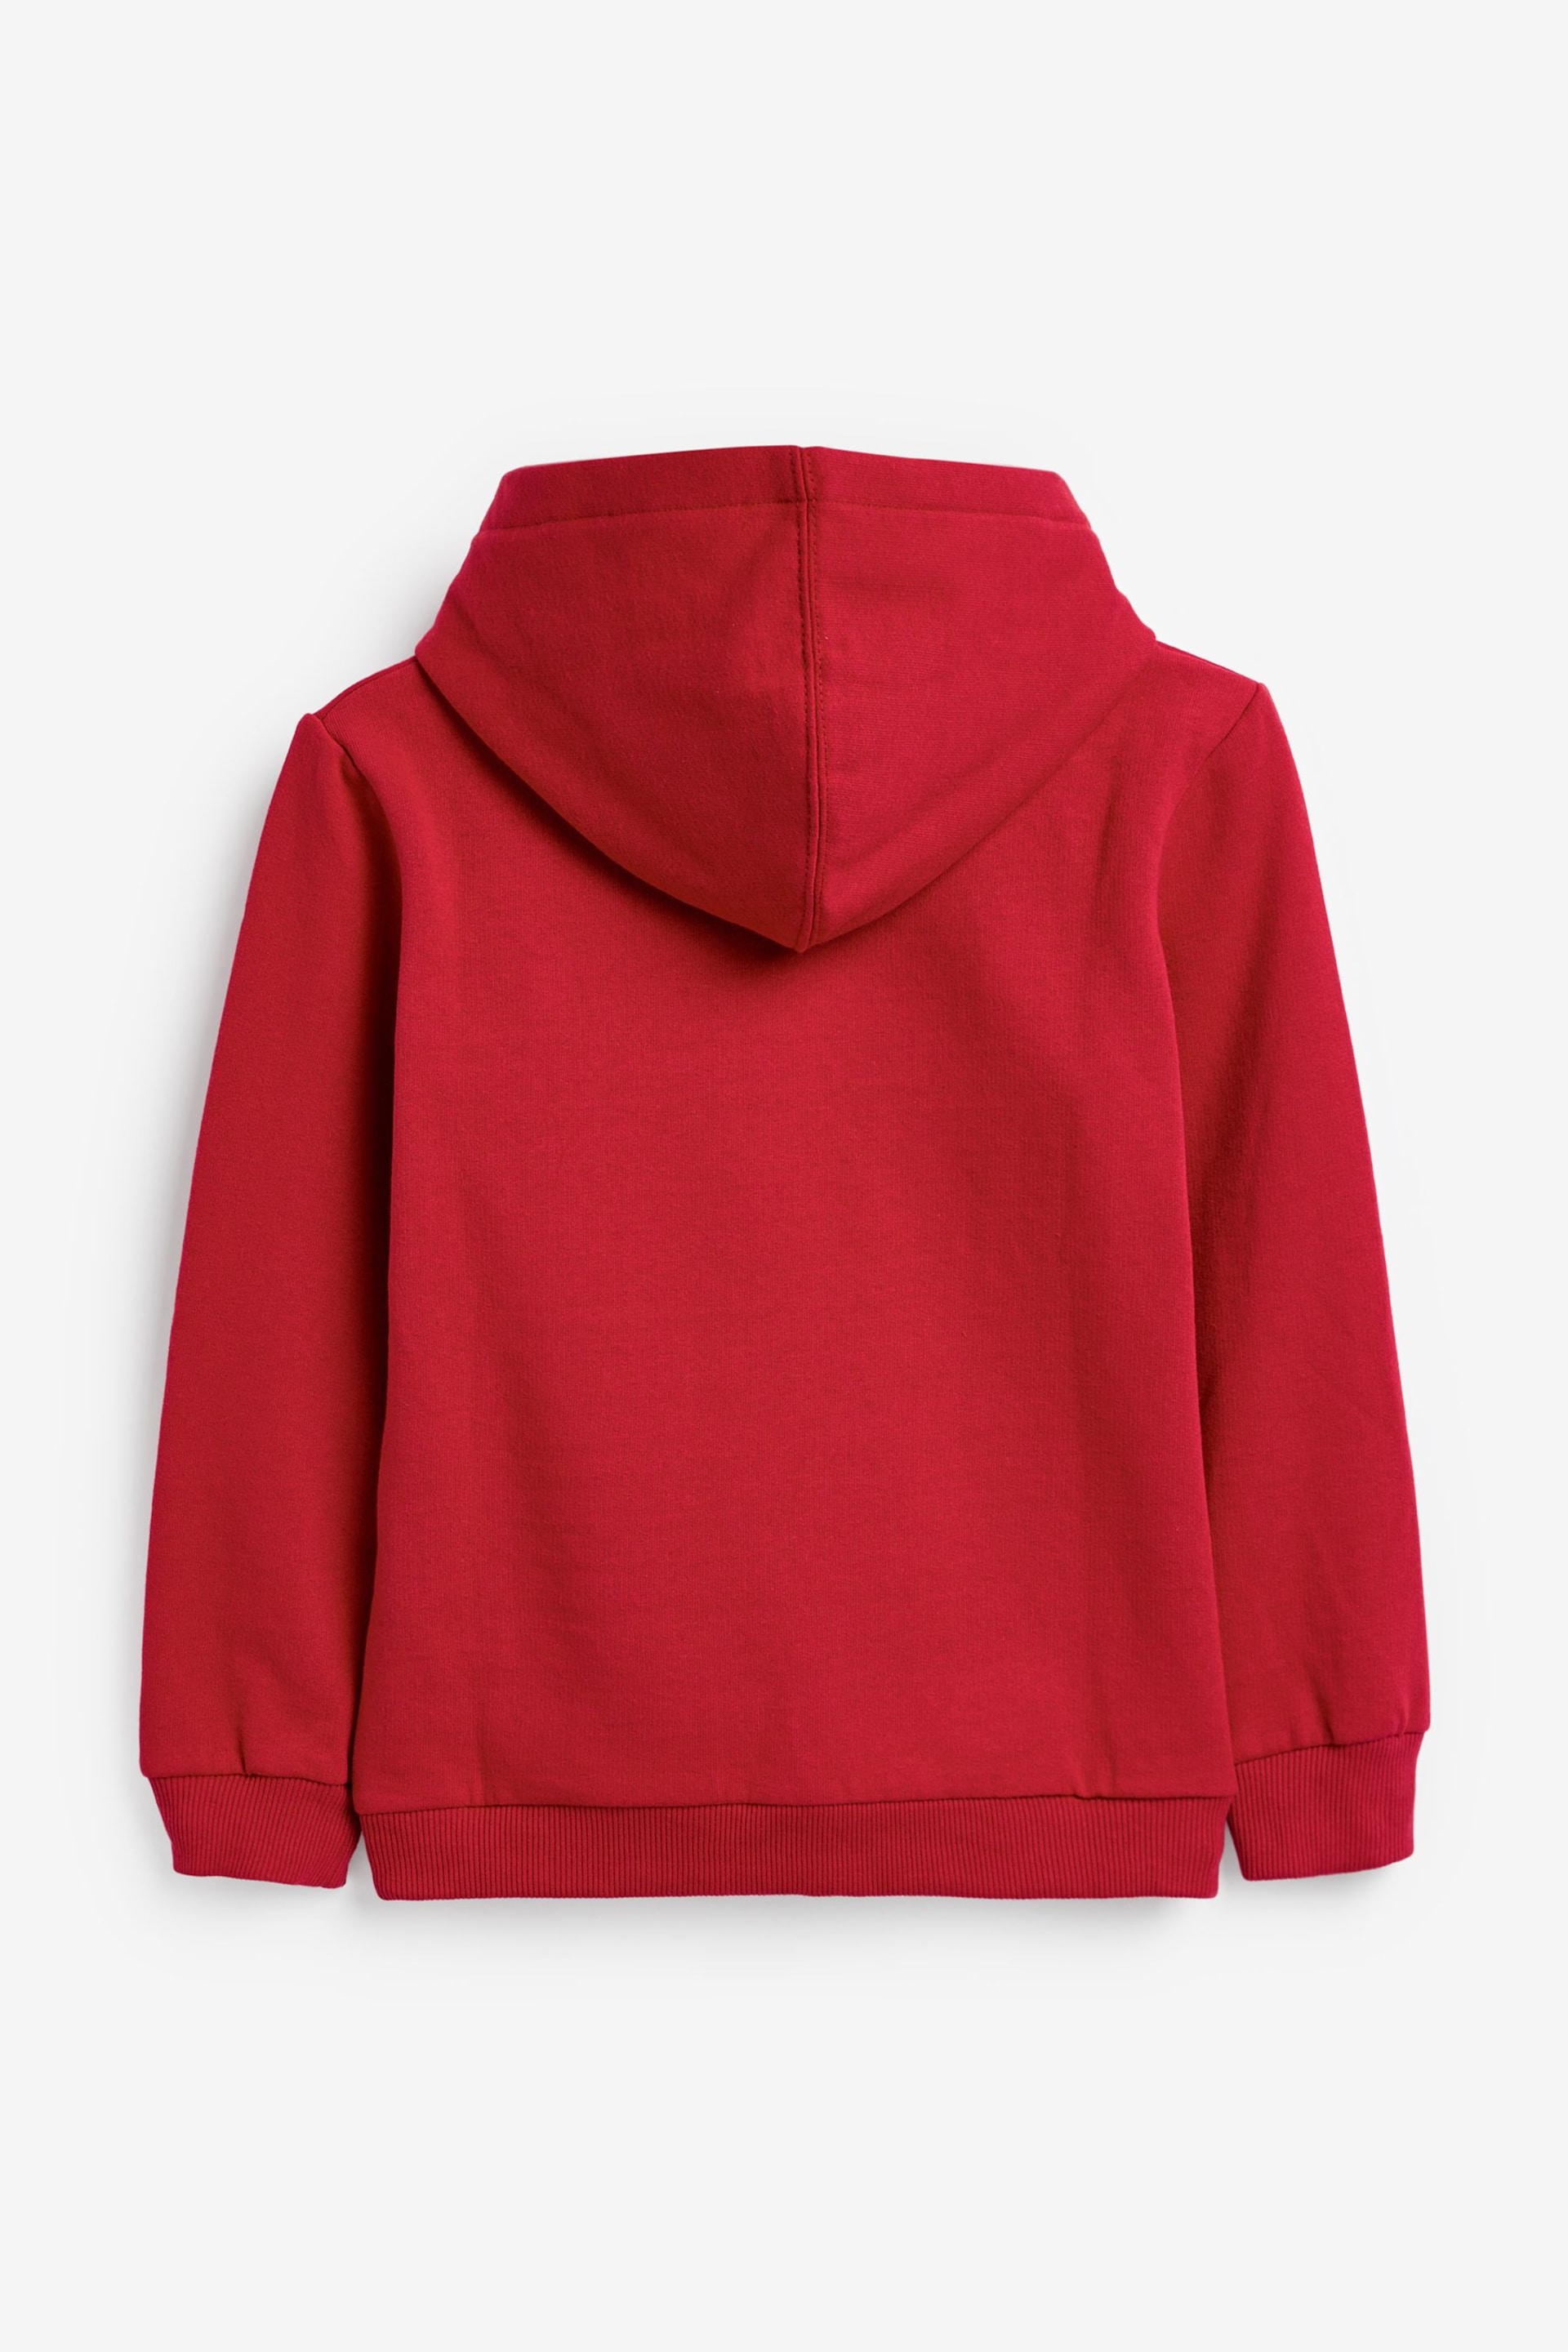 Levi's® Red Batwing Logo Hoodie - Image 7 of 8